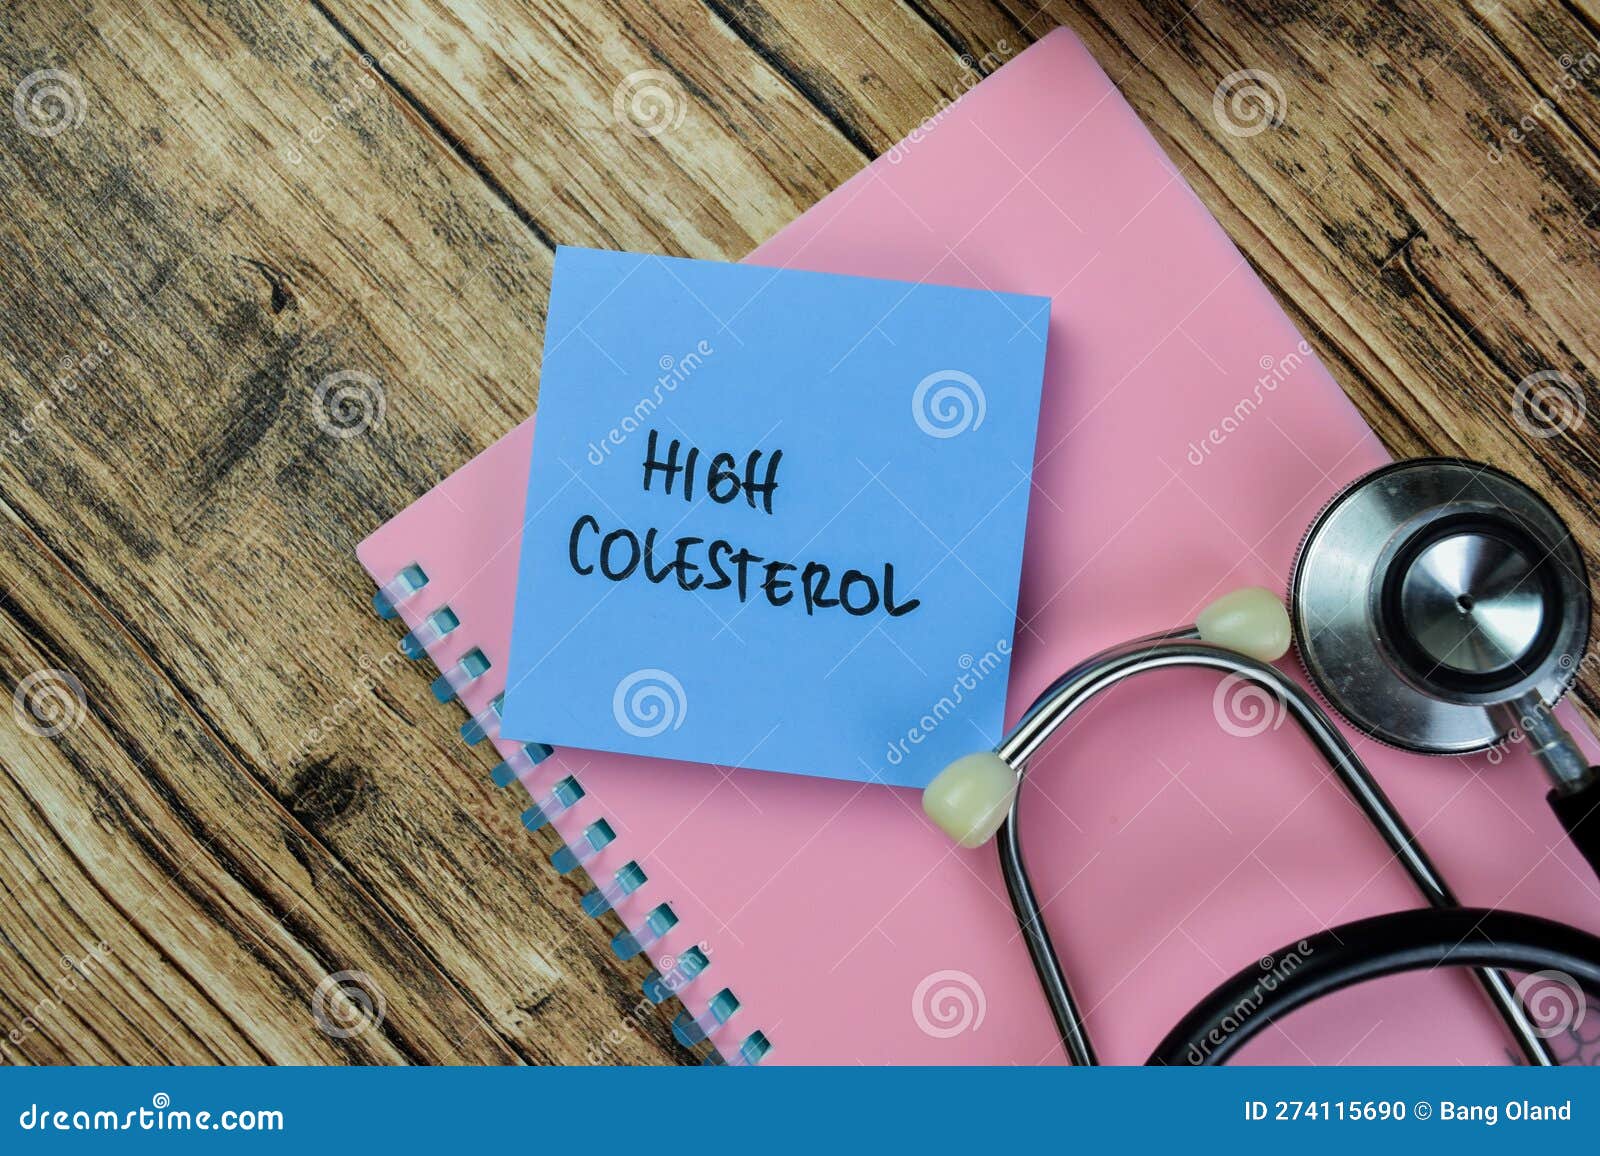 concept of high colesterol write on sticky notes with stethoscope  on wooden table